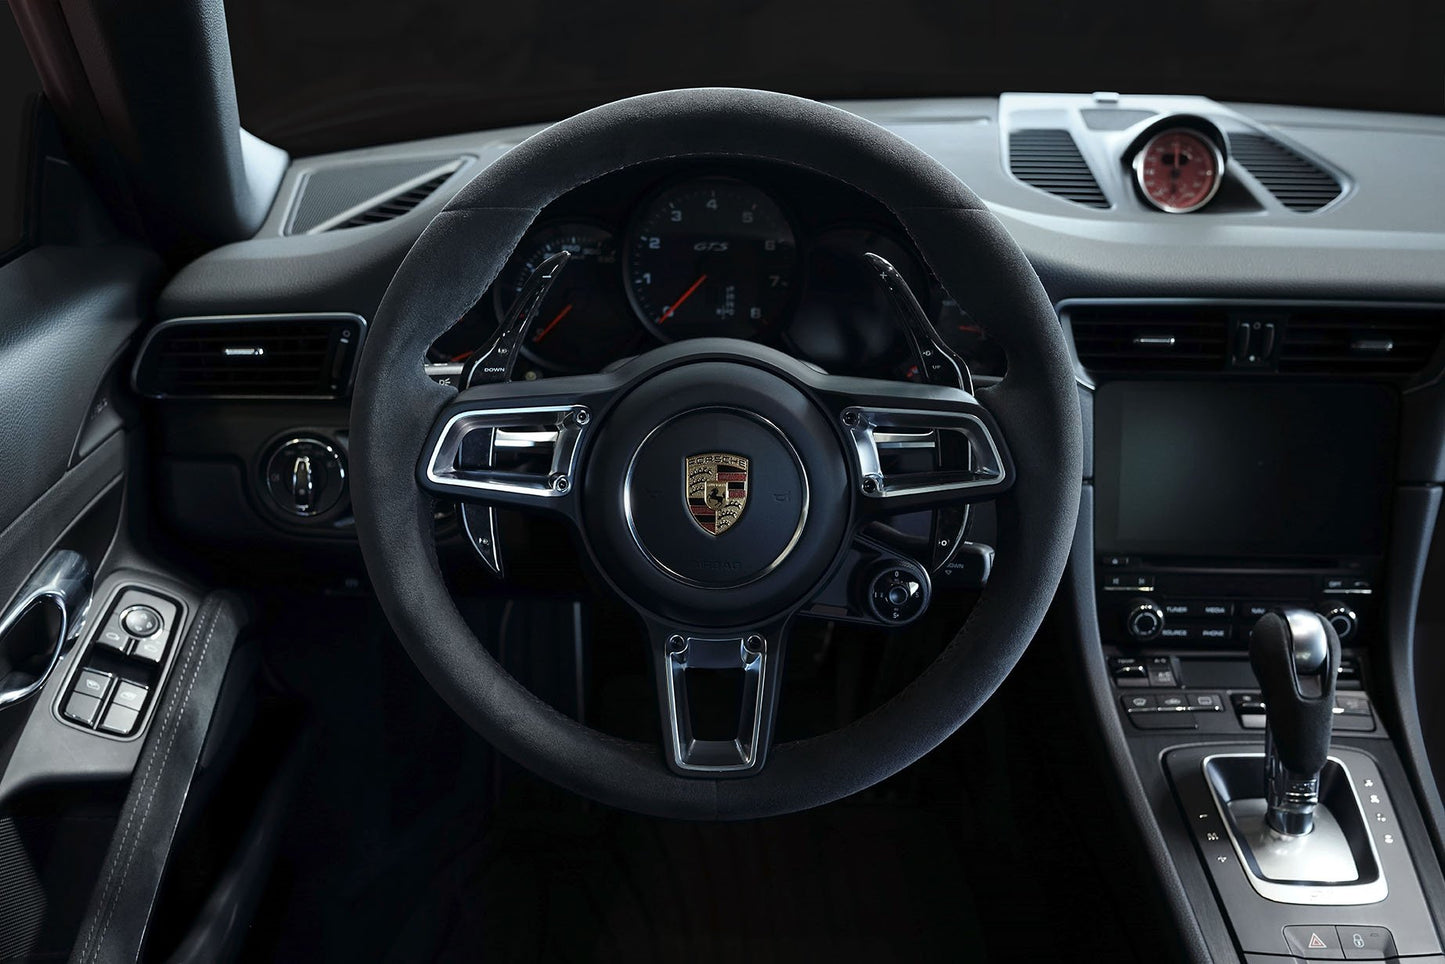 Porsche Forged Carbon Paddle Shifter